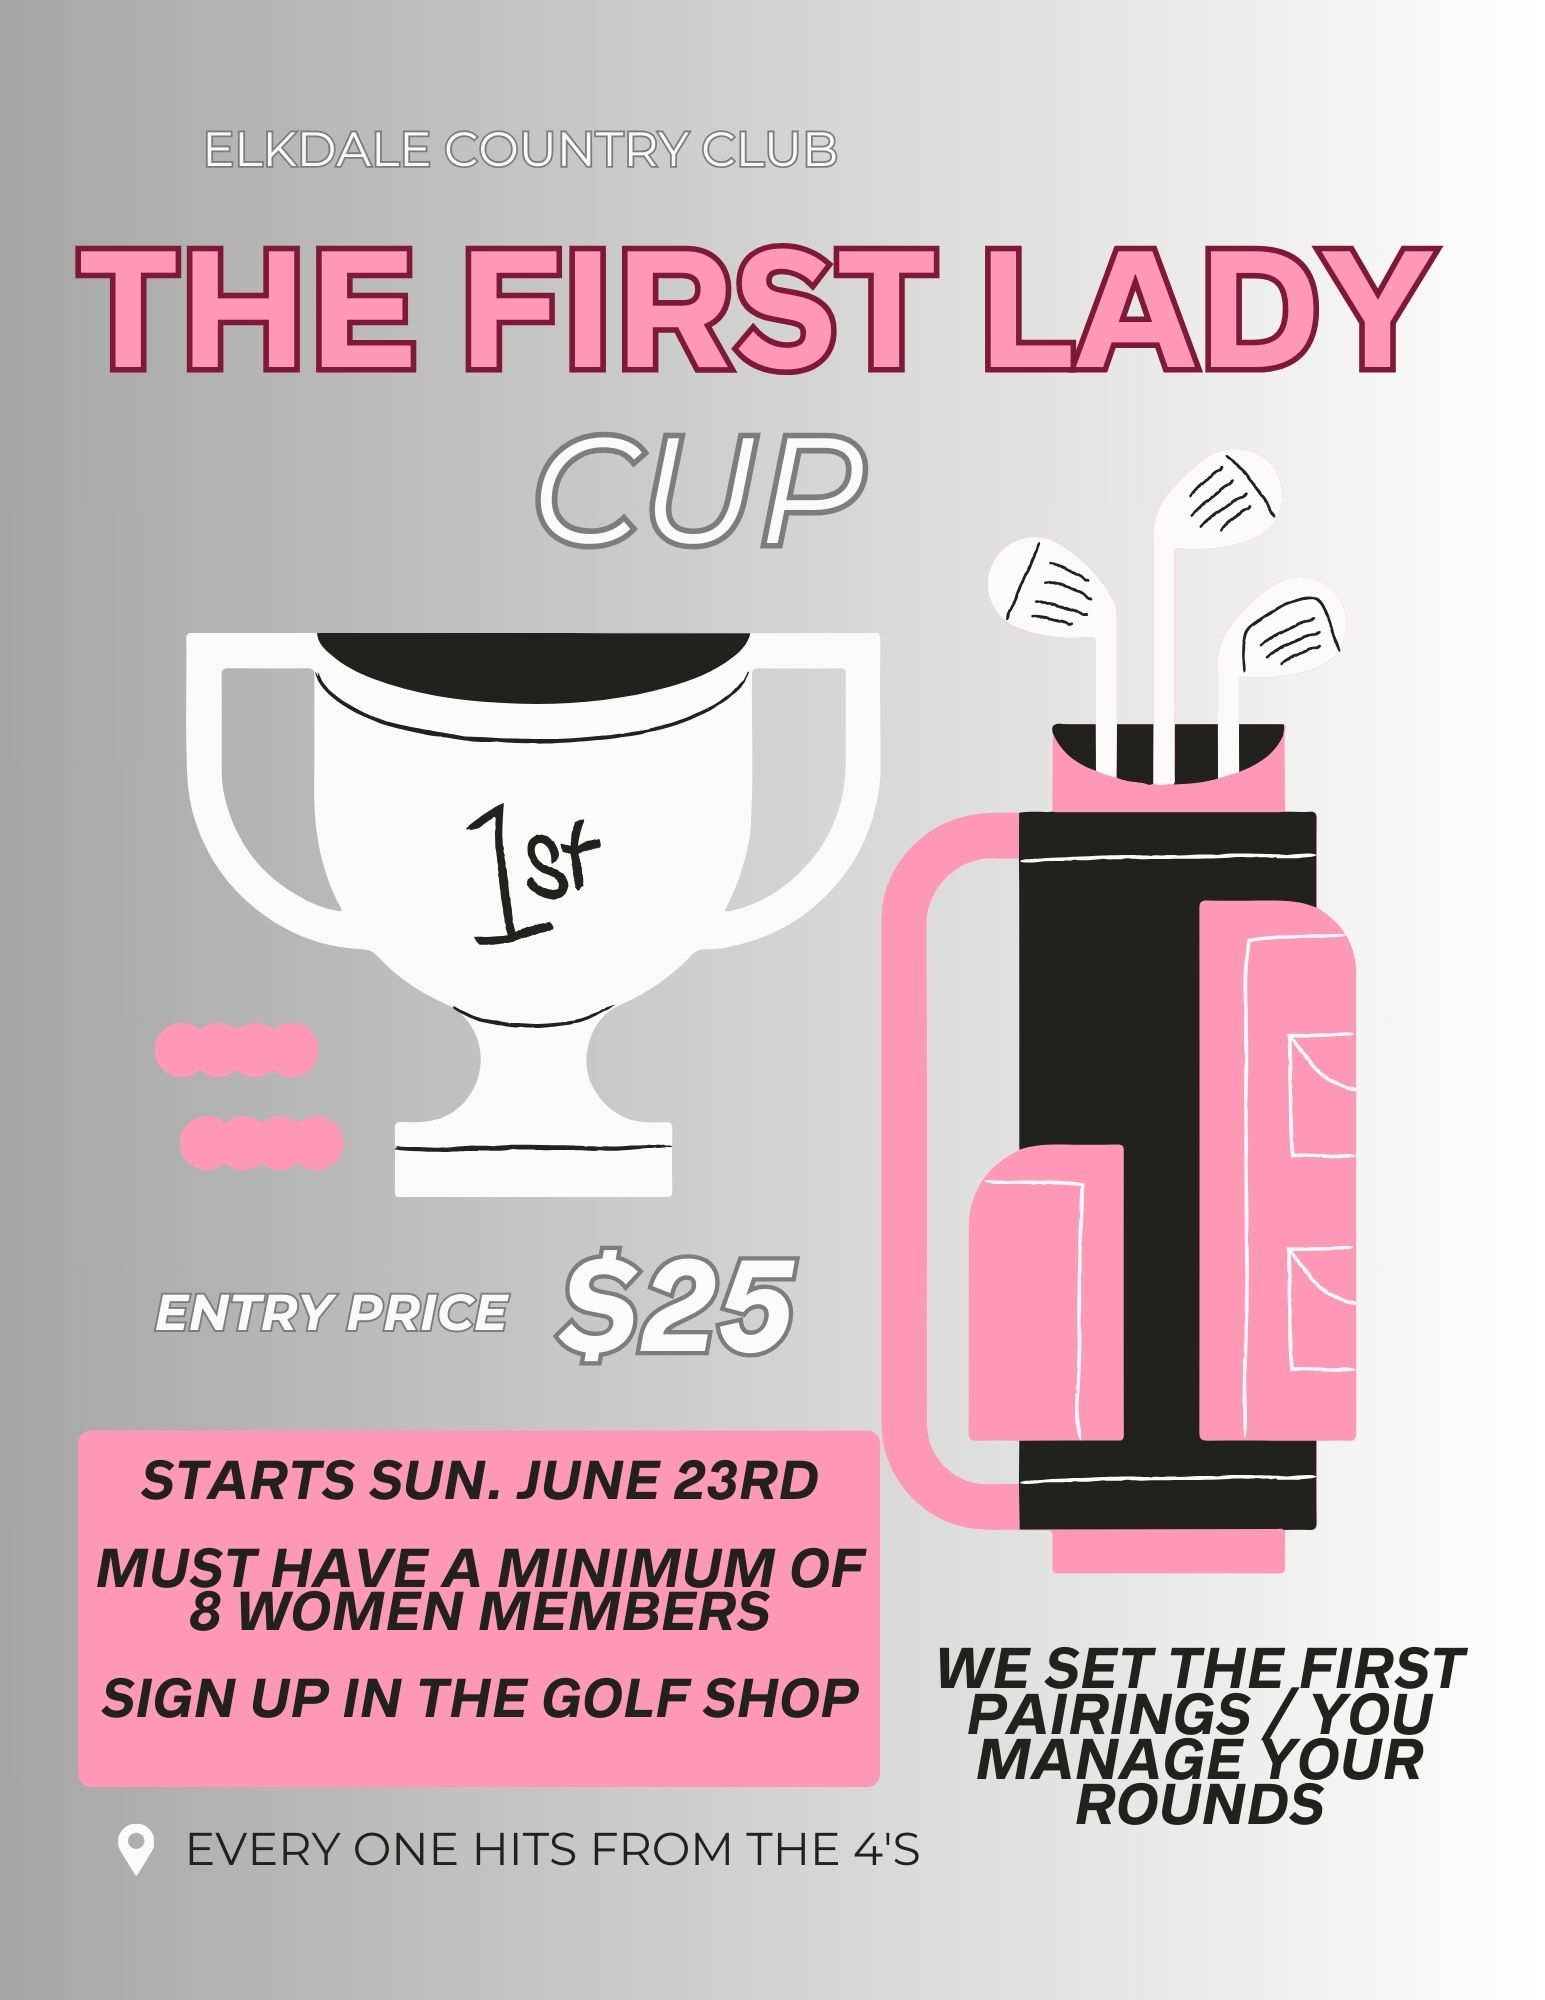 The First Lady Cup